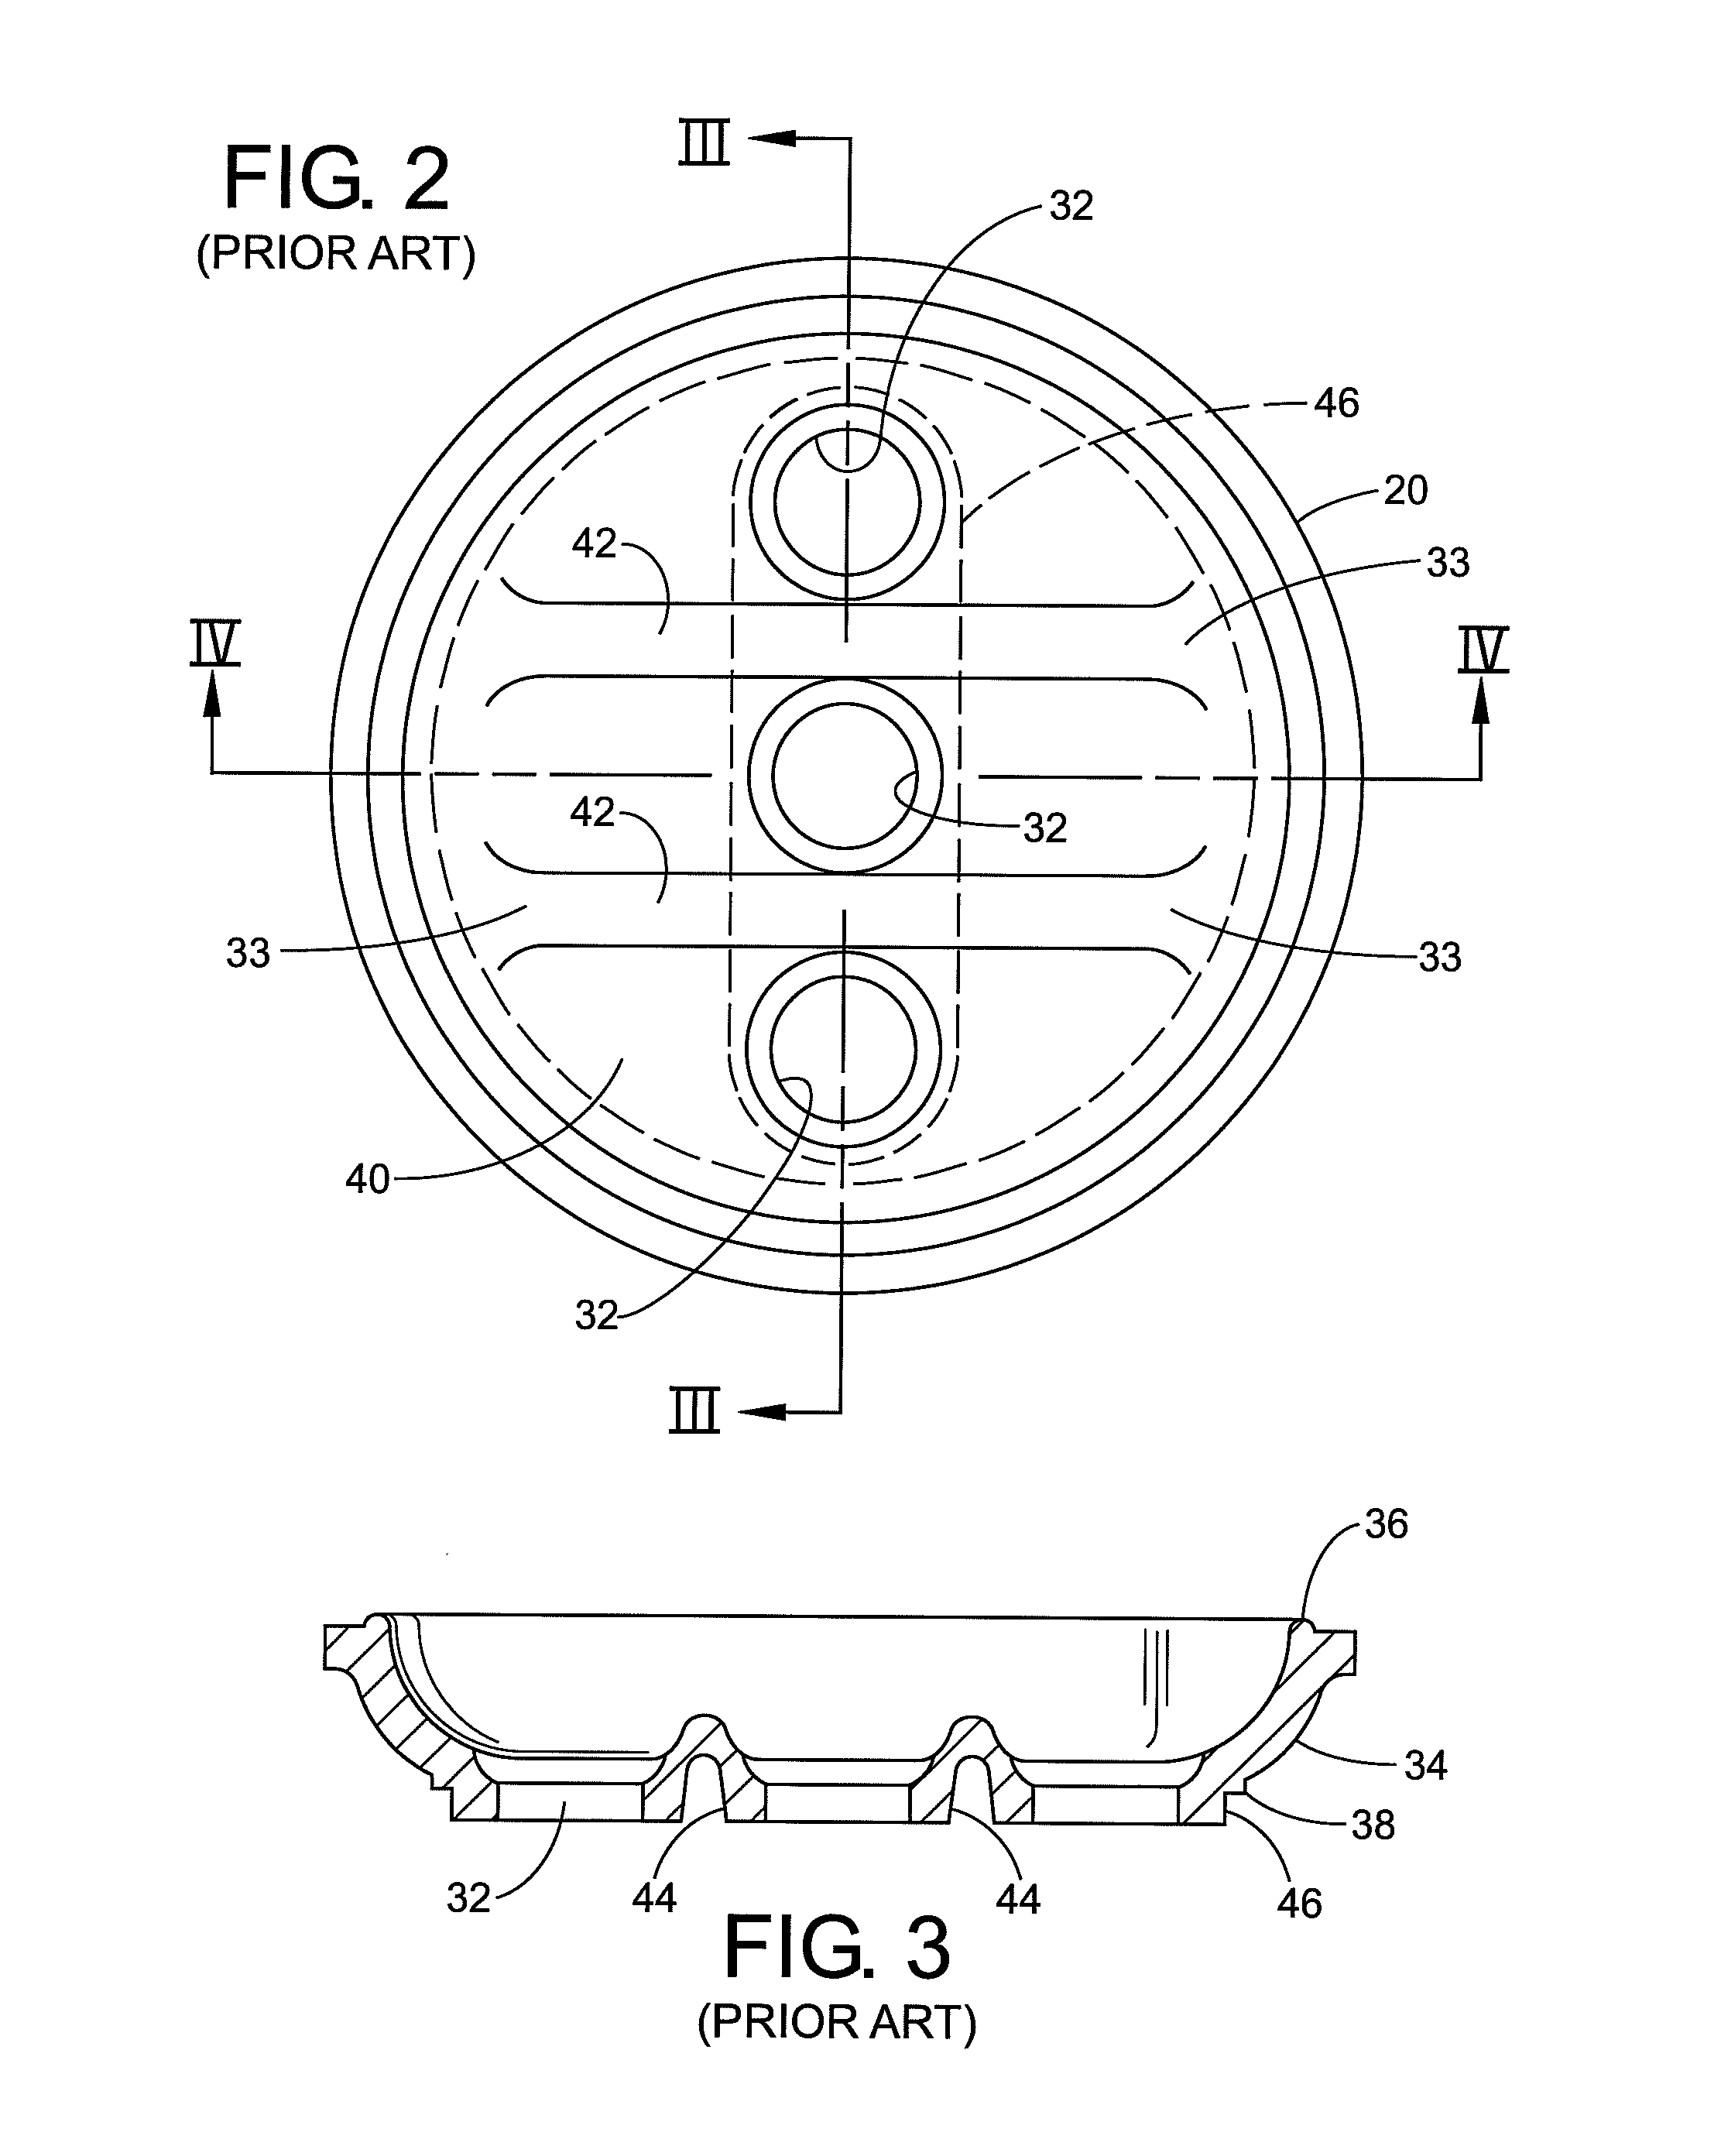 Glass forming apparatus